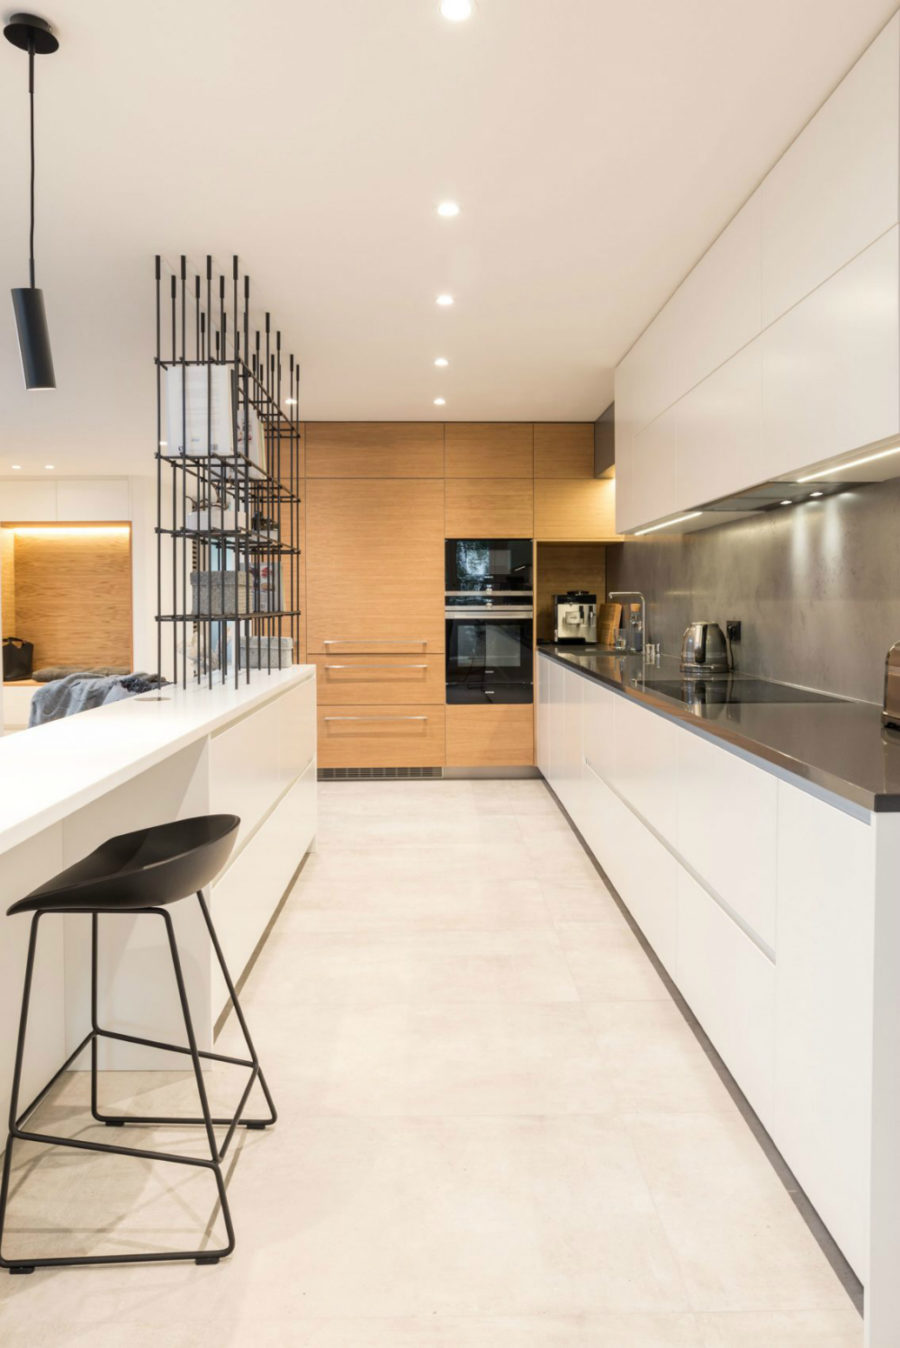 Kitchen and living zone stand separate thanks to the metallic shelving